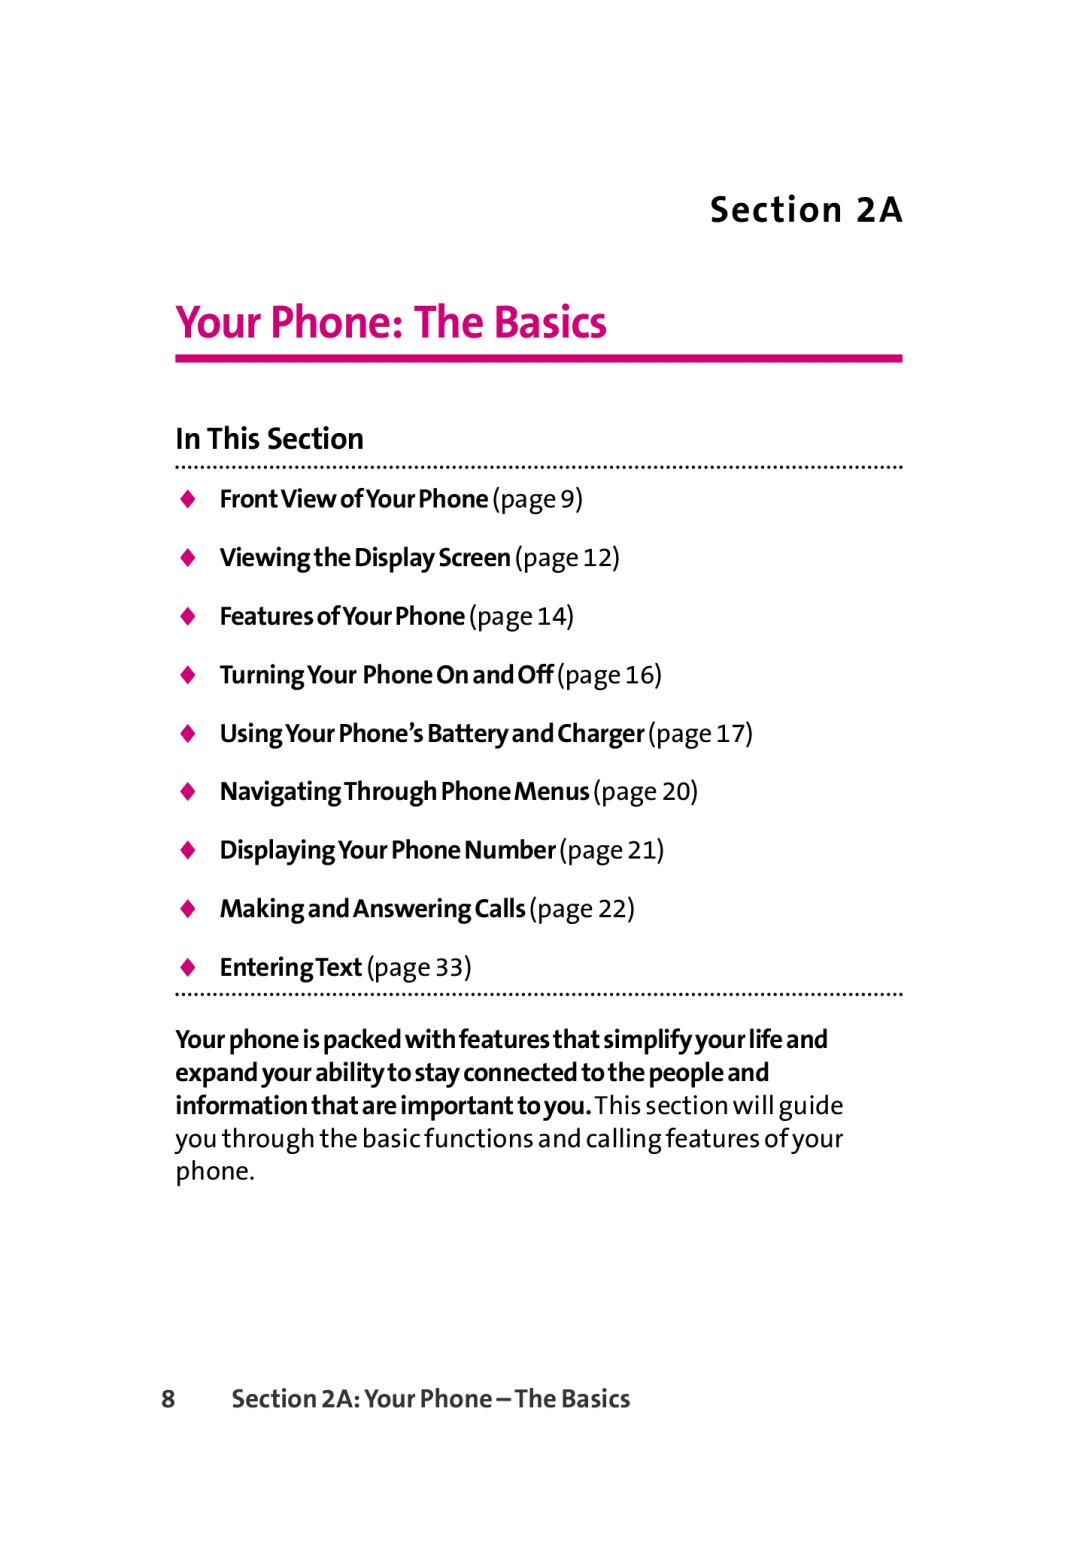 LG Electronics 350 manual Your Phone The Basics, A, FrontViewofYourPhonepage ViewingtheDisplayScreenpage, EnteringText page 